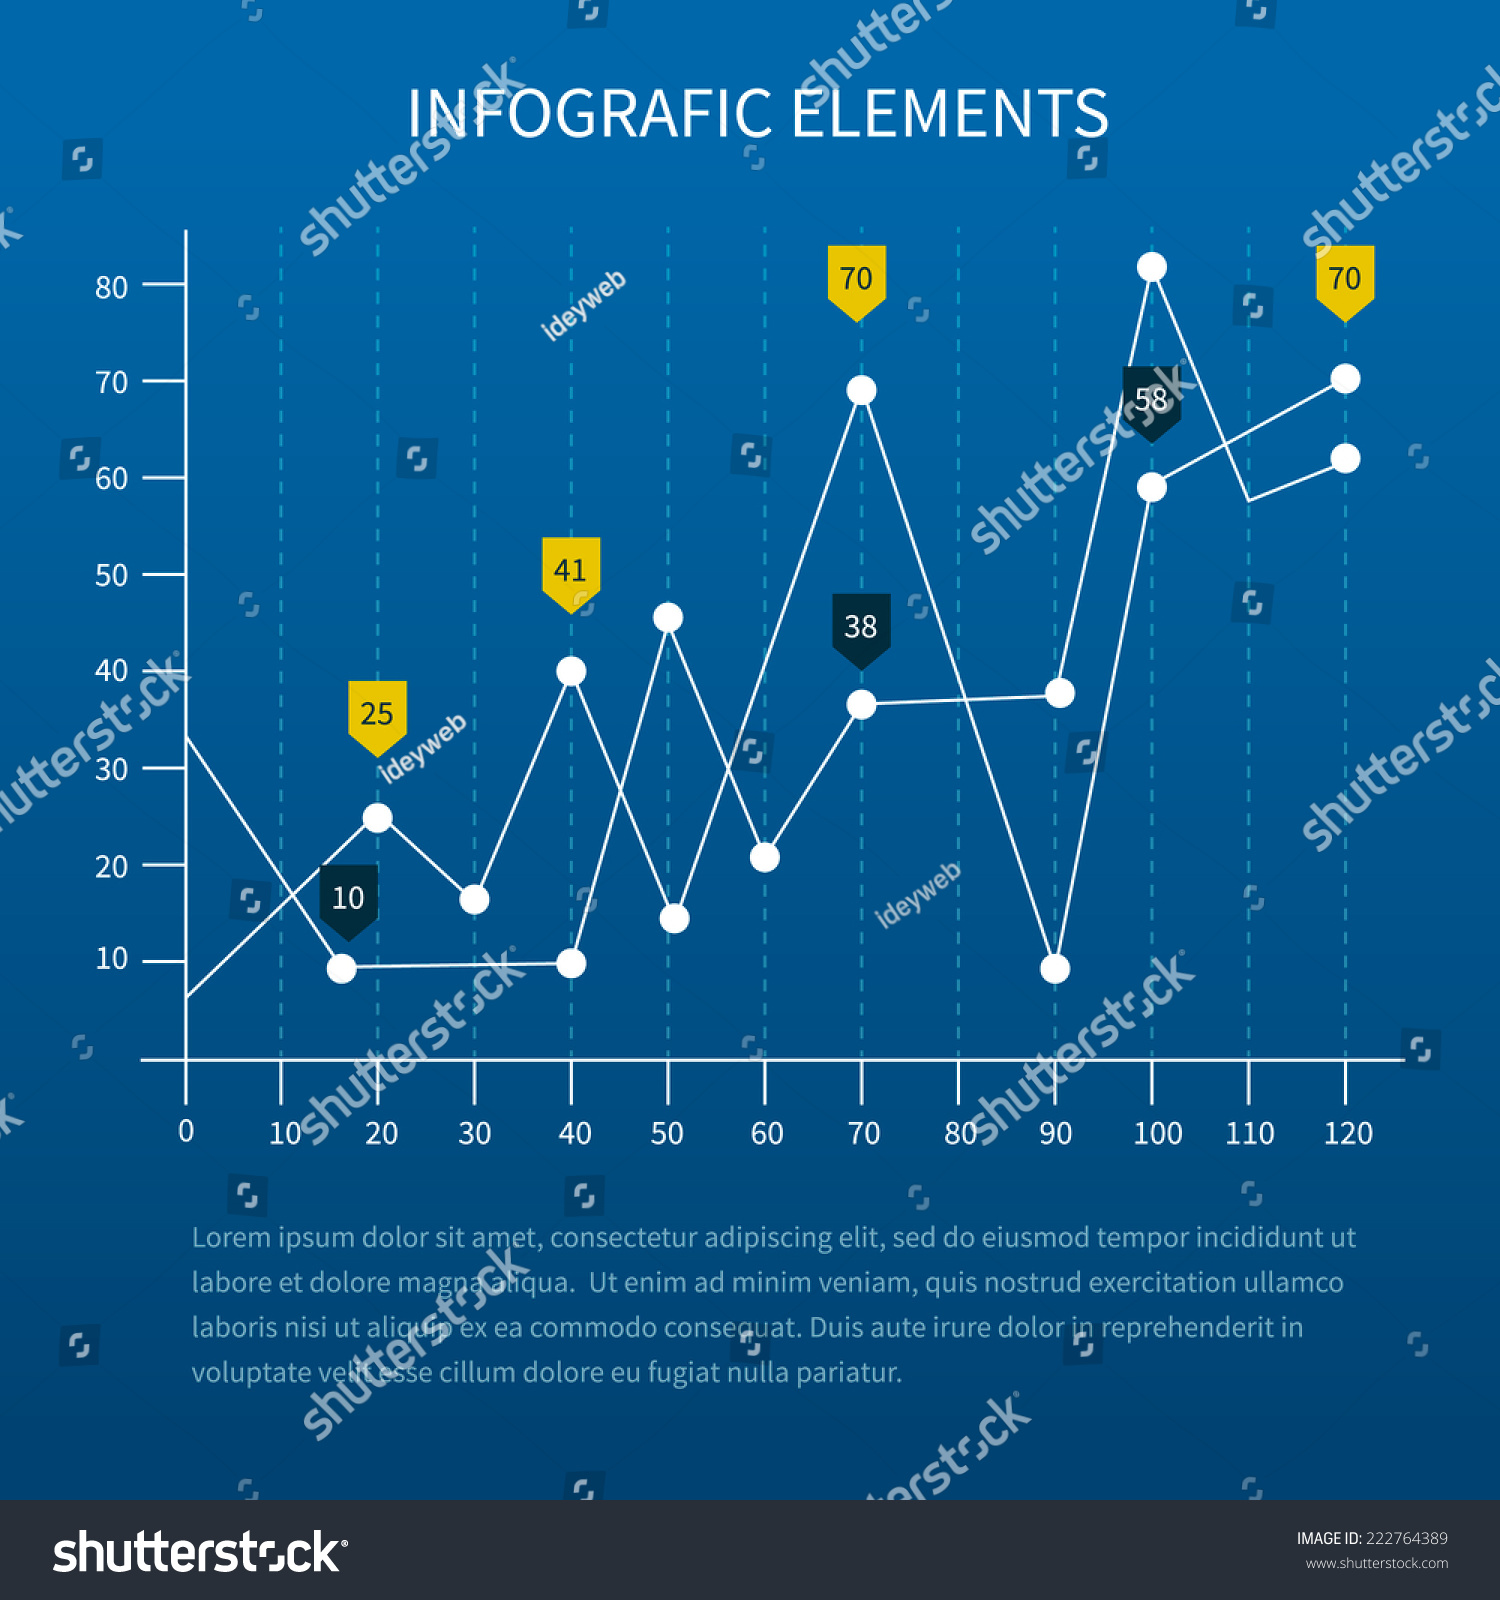 Detailed infographic elements. Vector illustration set of business statistics charts showing various visualization graphs and numbers. #222764389